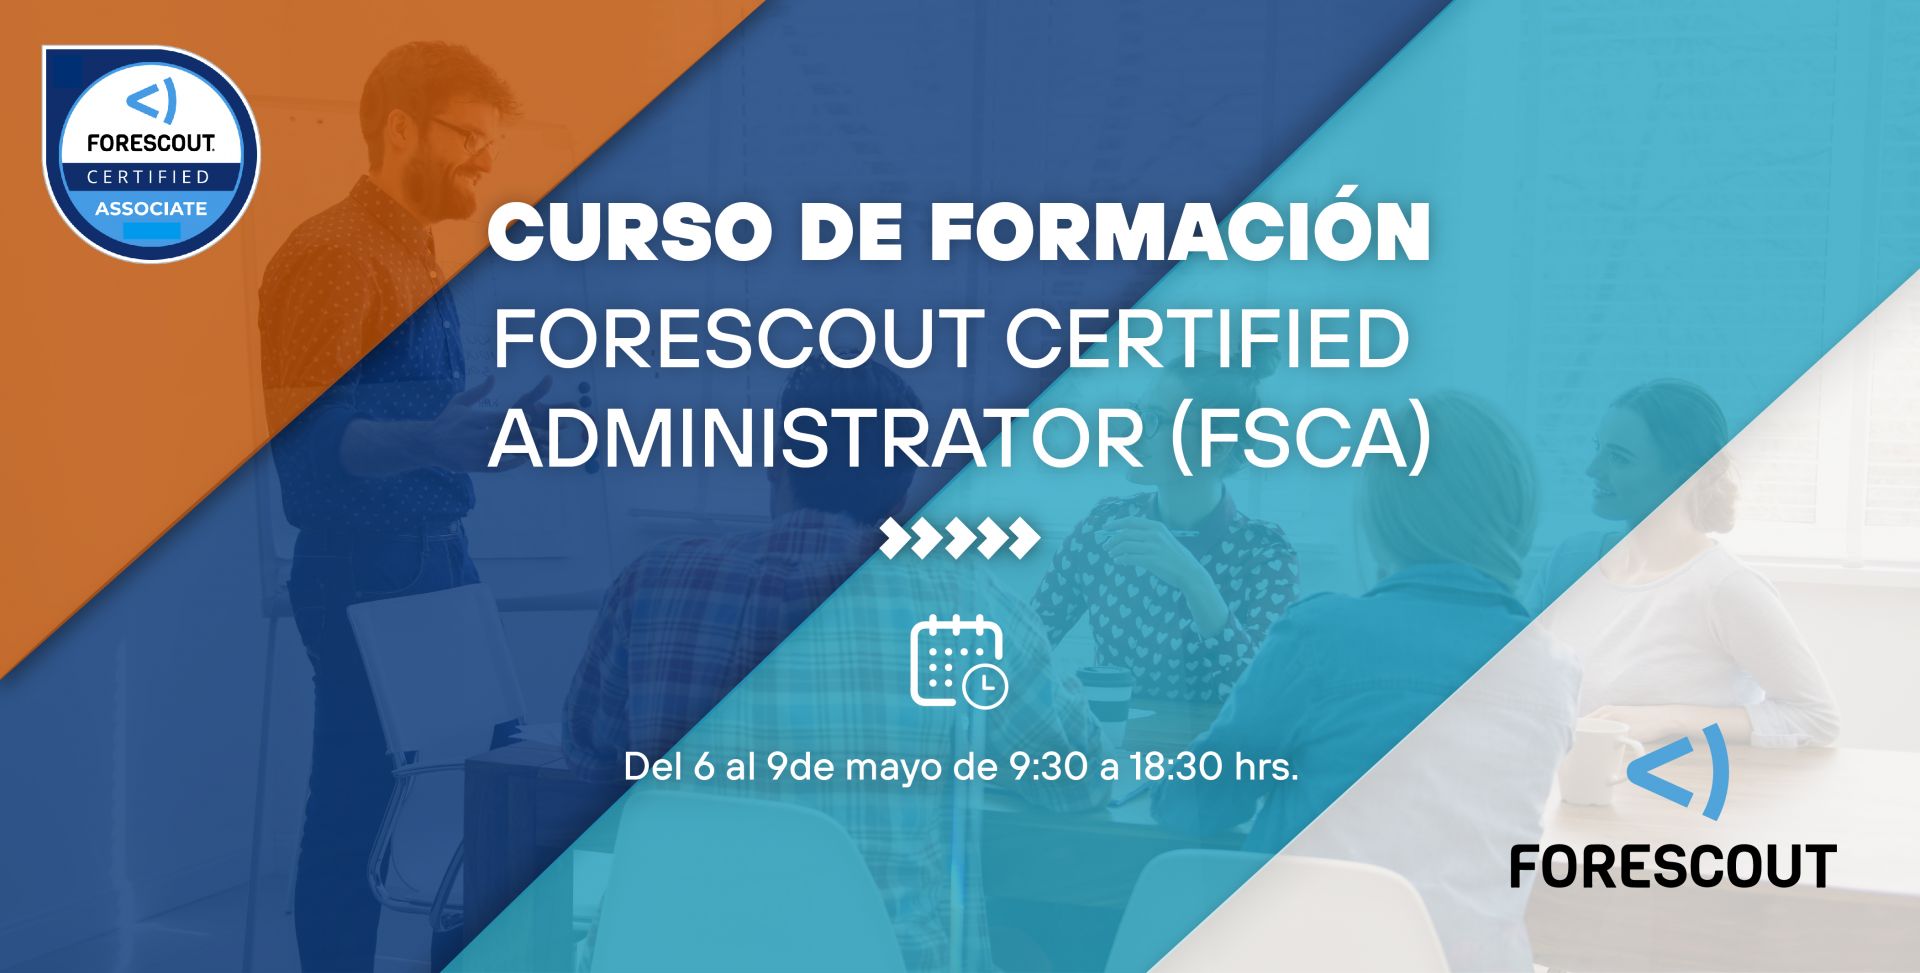 Forescout Certified Administrator (FSCA) 